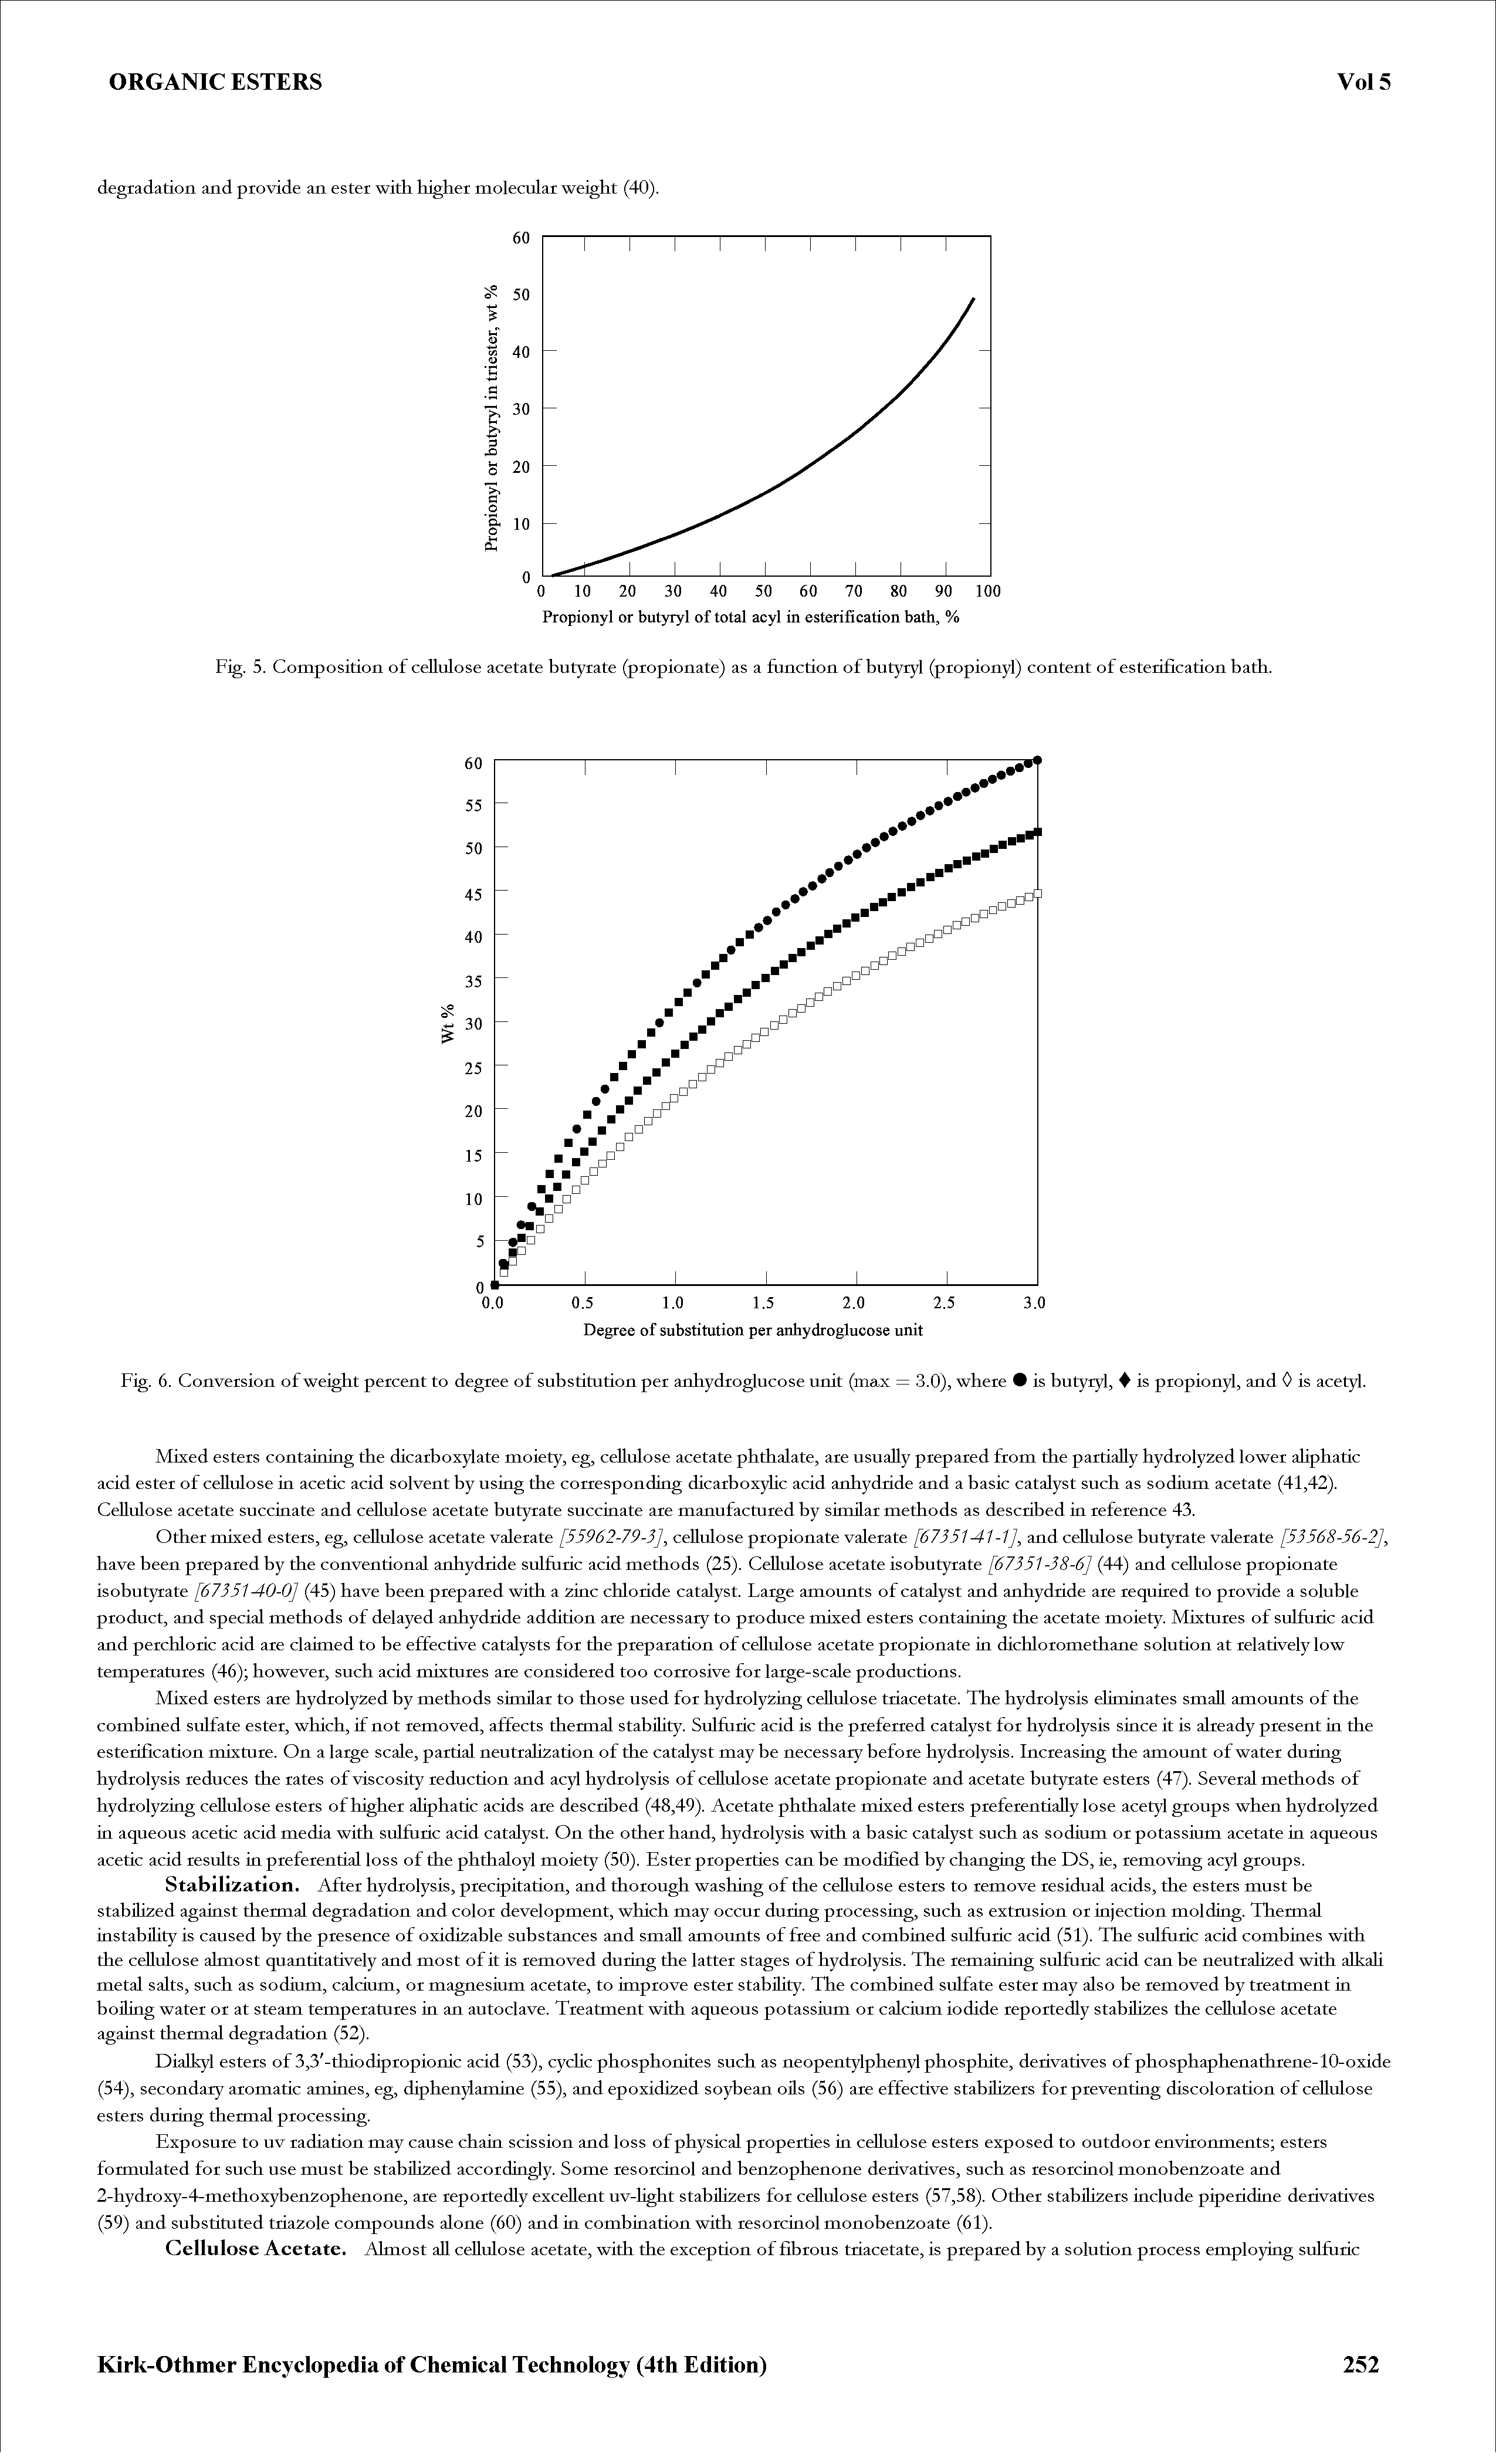 Fig. 5. Composition of cellulose acetate butyrate (propionate) as a function of butyryl (propionyl) content of esterification bath.